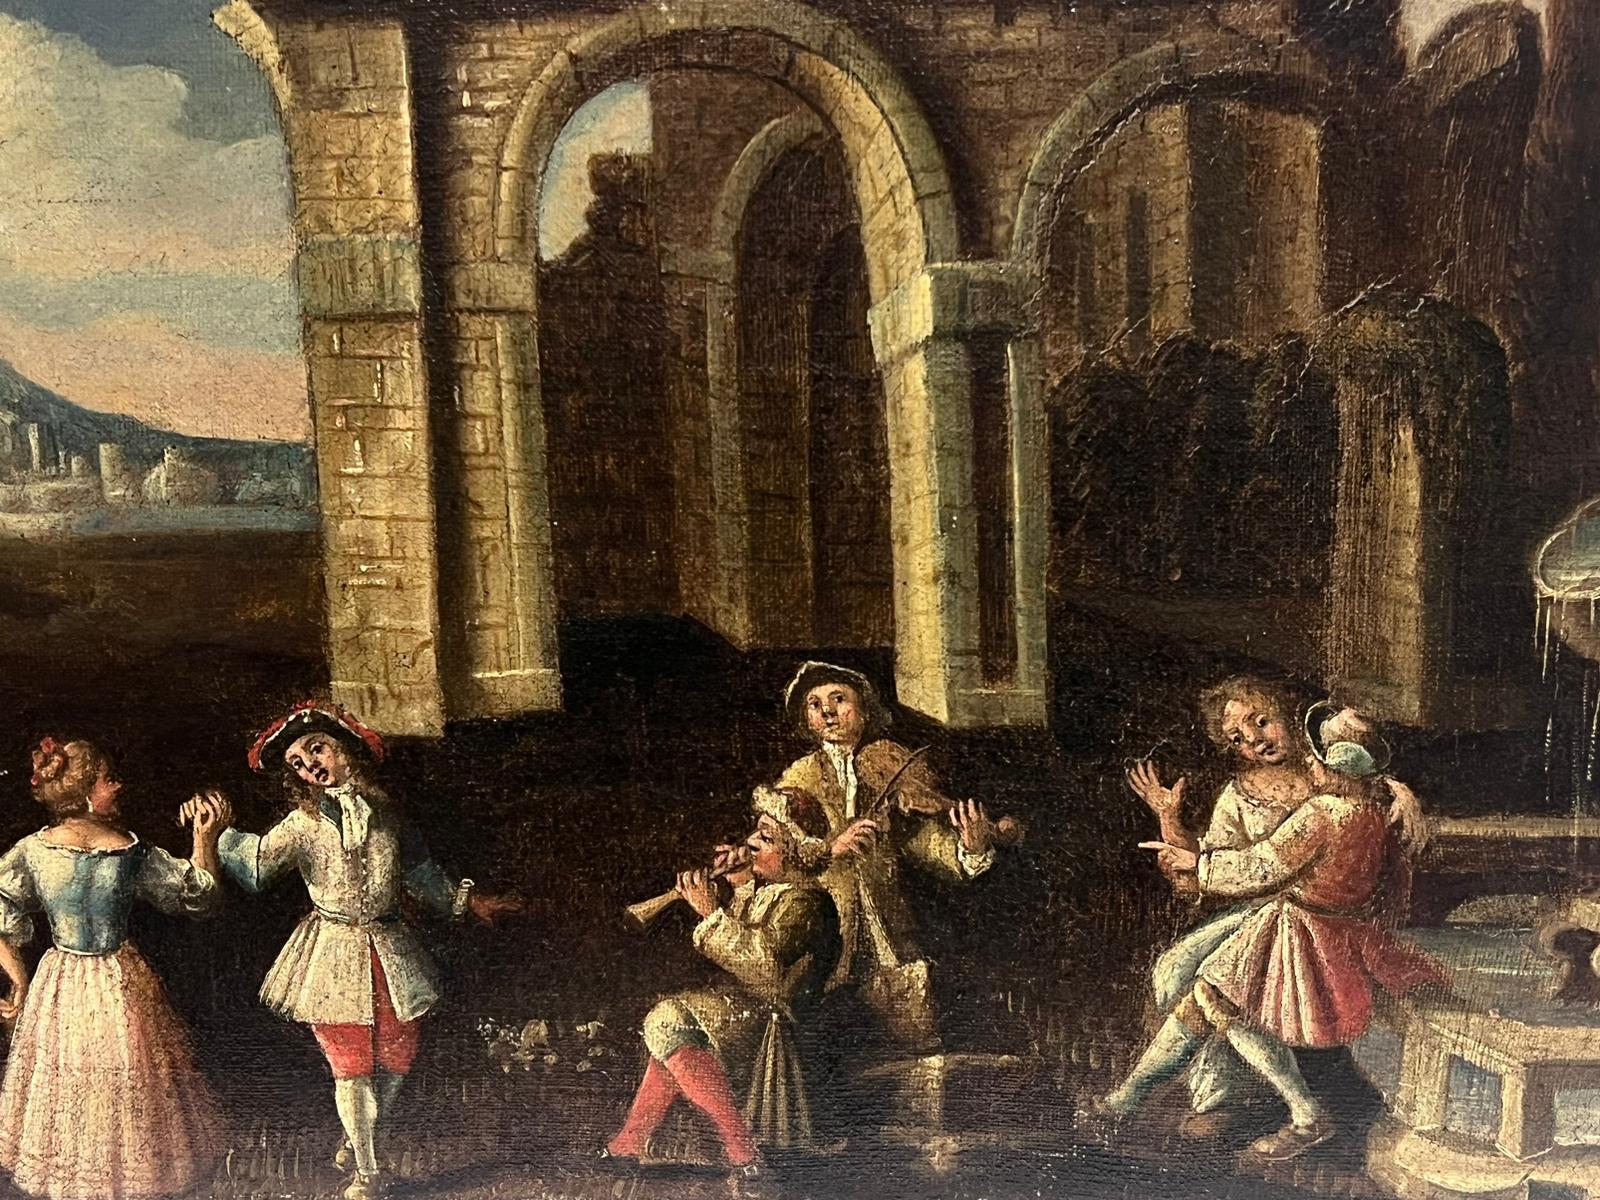 Revelry in a Classical Landscape
Italian School, early 18th century (circa 1700)
oil painting on canvas, laid on board, unframed
board: 20 x 36 inches
provenance: private collection, East Anglia, England
condition: very good and sound condition for